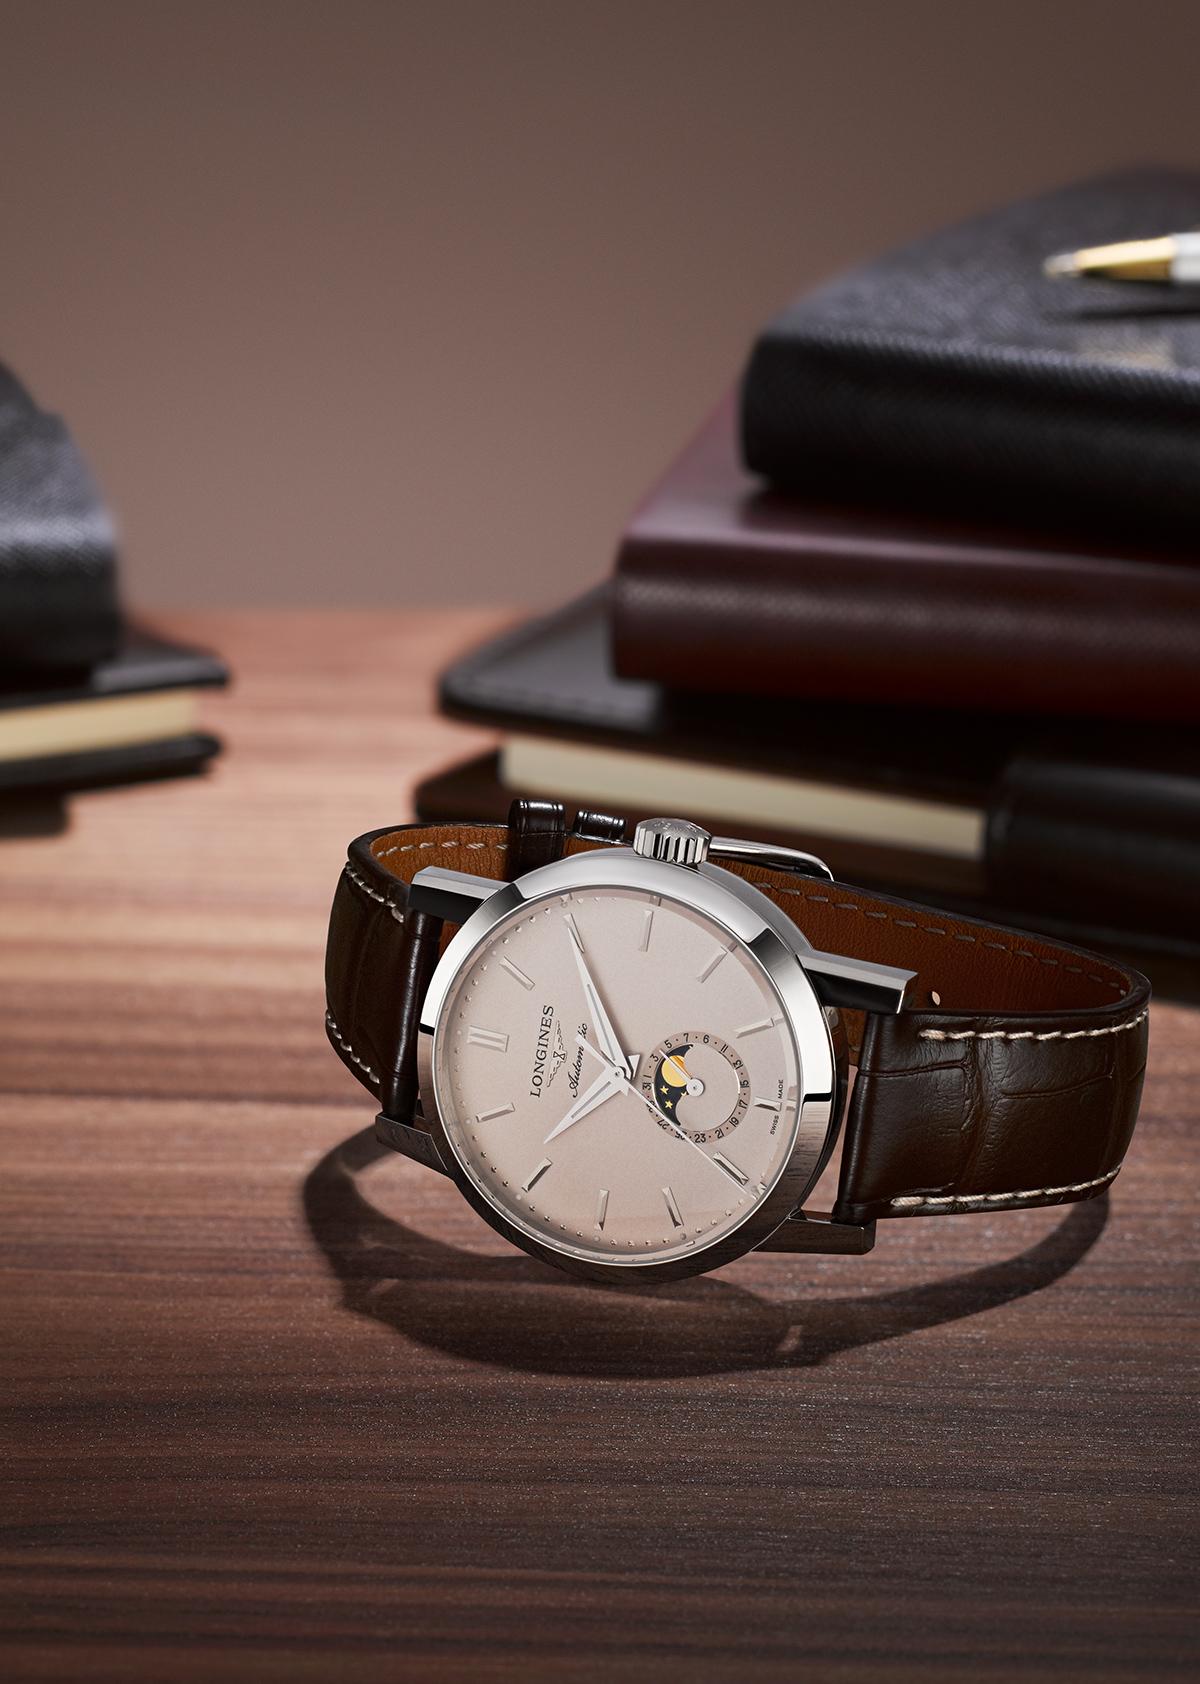 A New Chapter in the Longines 1832 Iconic Tale. The Longines 1832 Moonphase Men's Brown Leather Strap Watch with a unique moon-phase feature on its side.